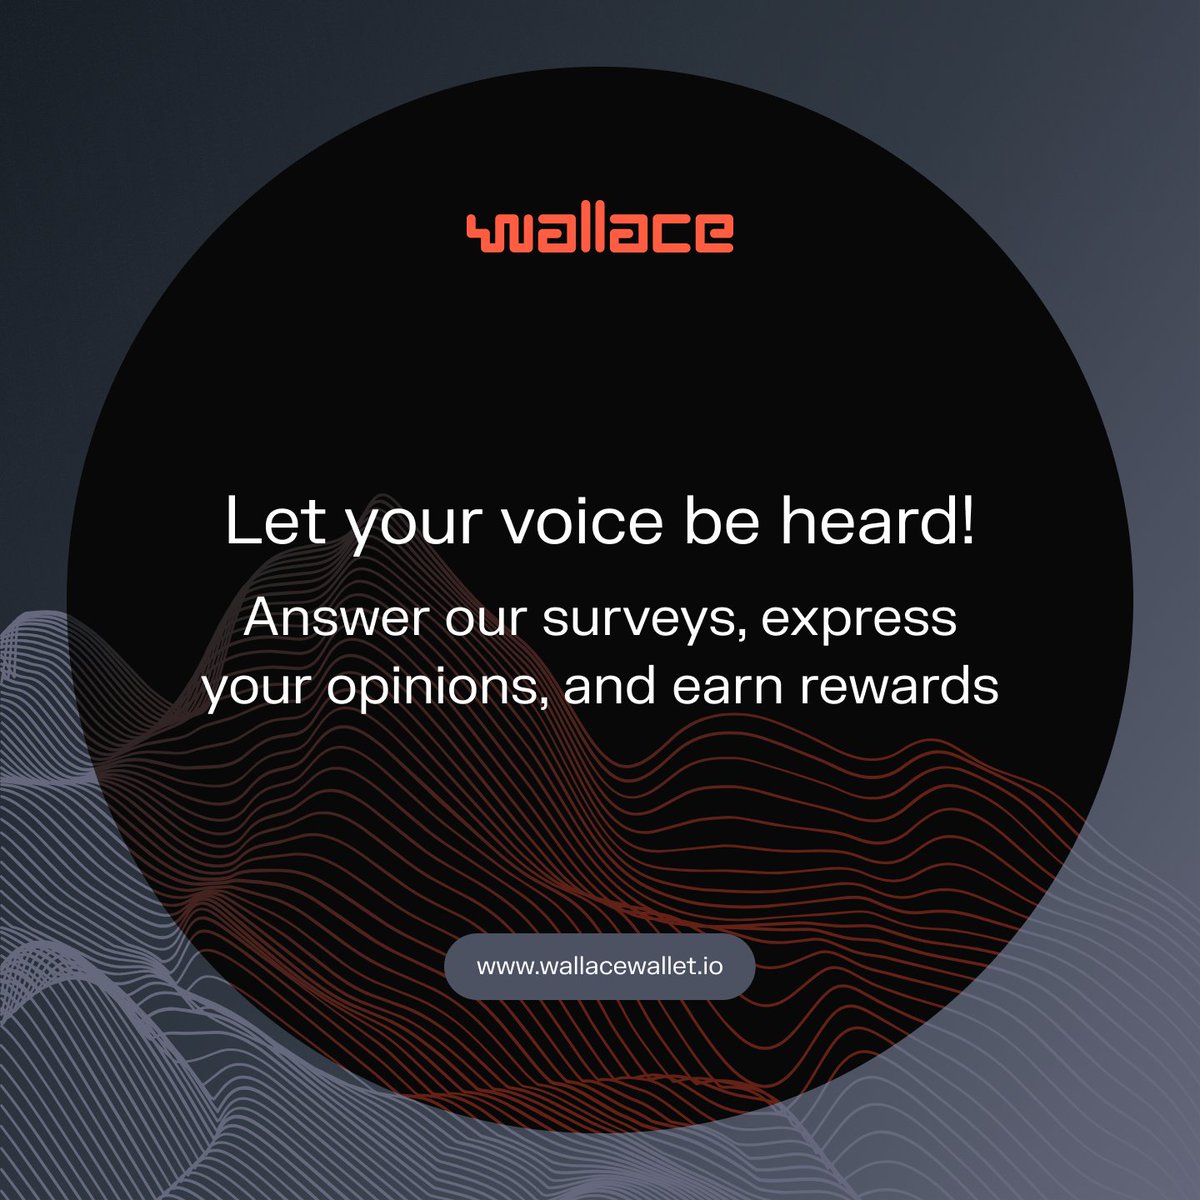 Transform your thoughts into rewards by participating in our weekly survey today. Your voice matters, and so do the rewards waiting for you! Download: wallacewallet.io 🚀💰 #OpinionsIntoRewards #EarnWithWallace #FutureOfFinance